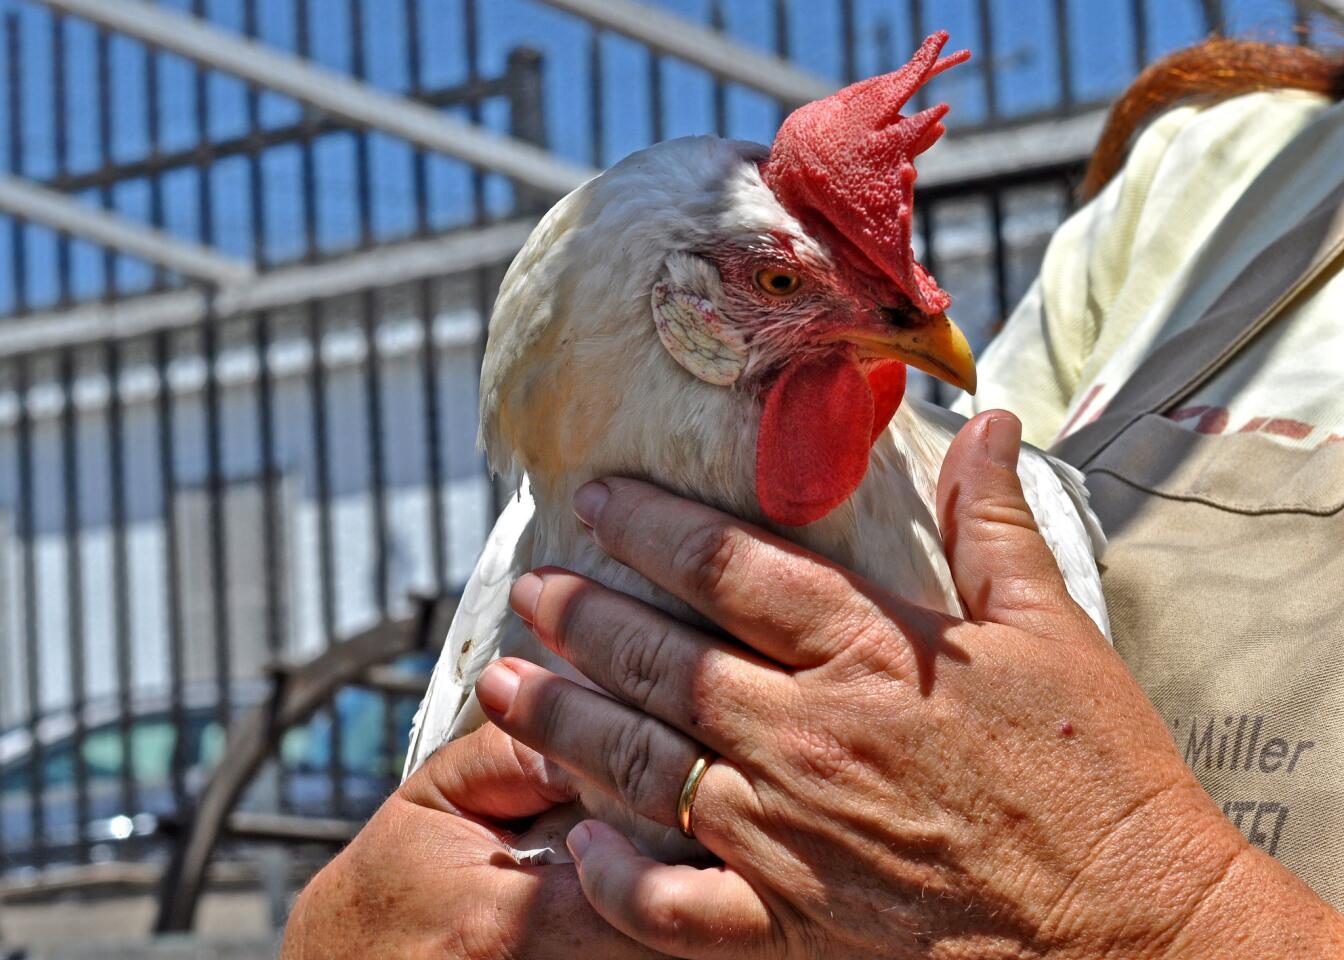 Geri Miller works the gardens for those who lease plots. Chickens she raises lay eggs that go to restaurants.